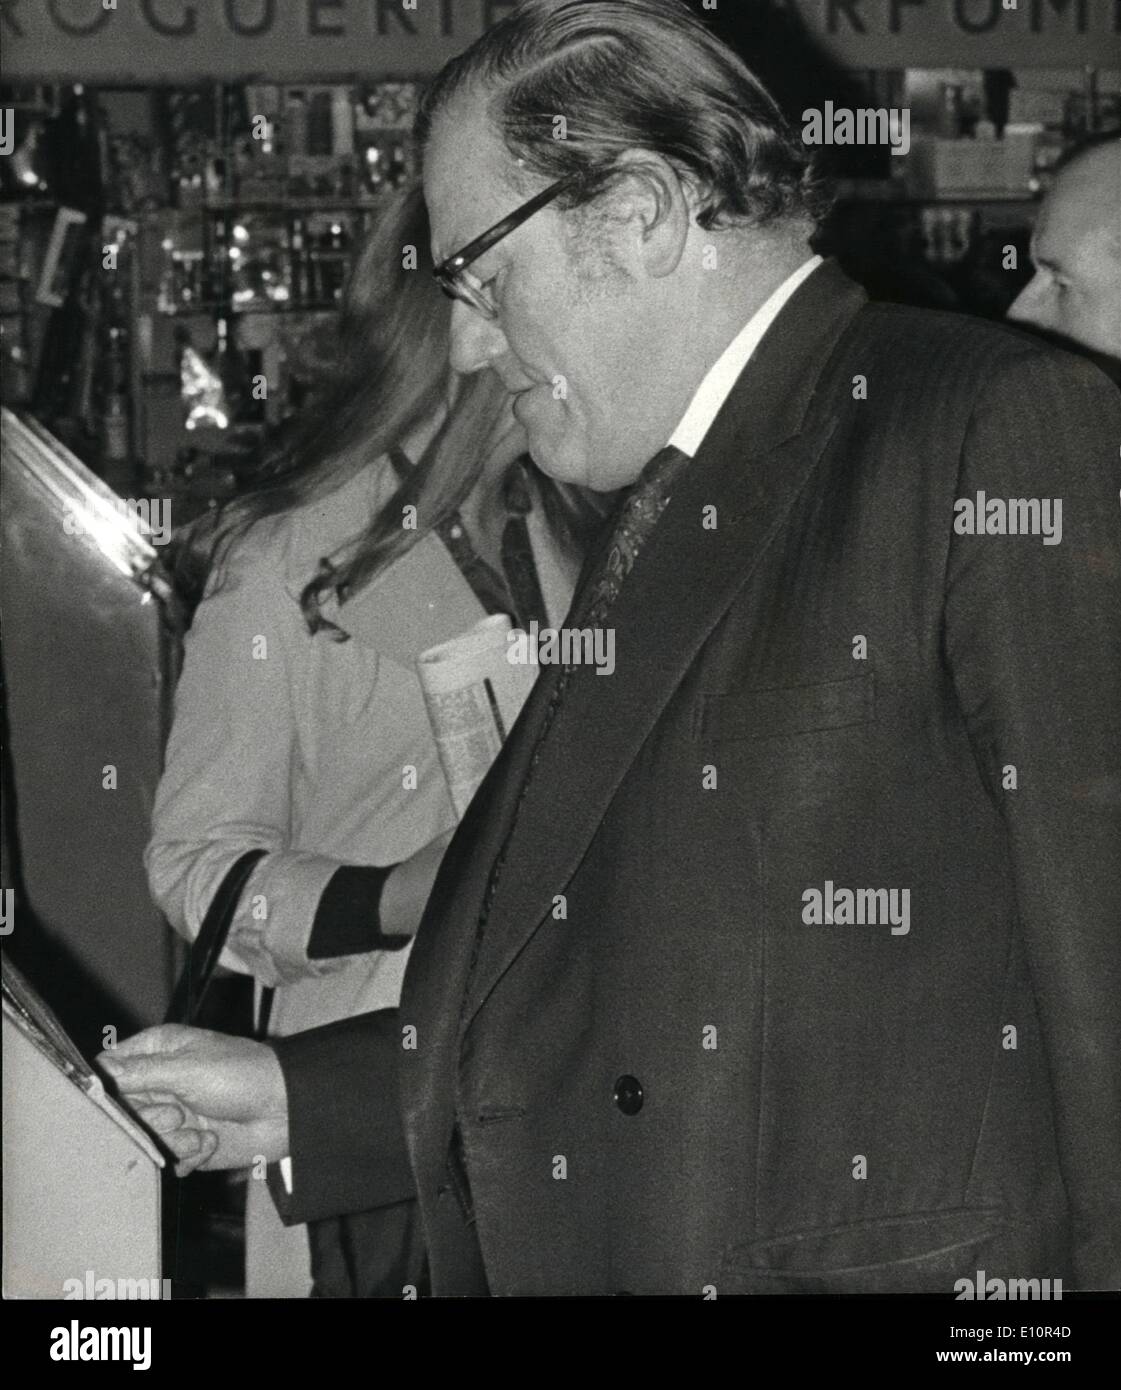 Dec. 12, 1973 - ''I saw Maudling Drunk'' - Poulson's alleged statement: Accused architect John Paulson found former Home Secretary Reginald Maudling ''In his shirtsleeves and drunk'' one afternoon when he went to see him, a court was told yesterday, This was at a time when Mr. Maudling was associated with a company - the Real Estate Fund of America which, according to Poulson, Mr. Maudling hoped would make him ''net a millionaire but a billionaire Stock Photo